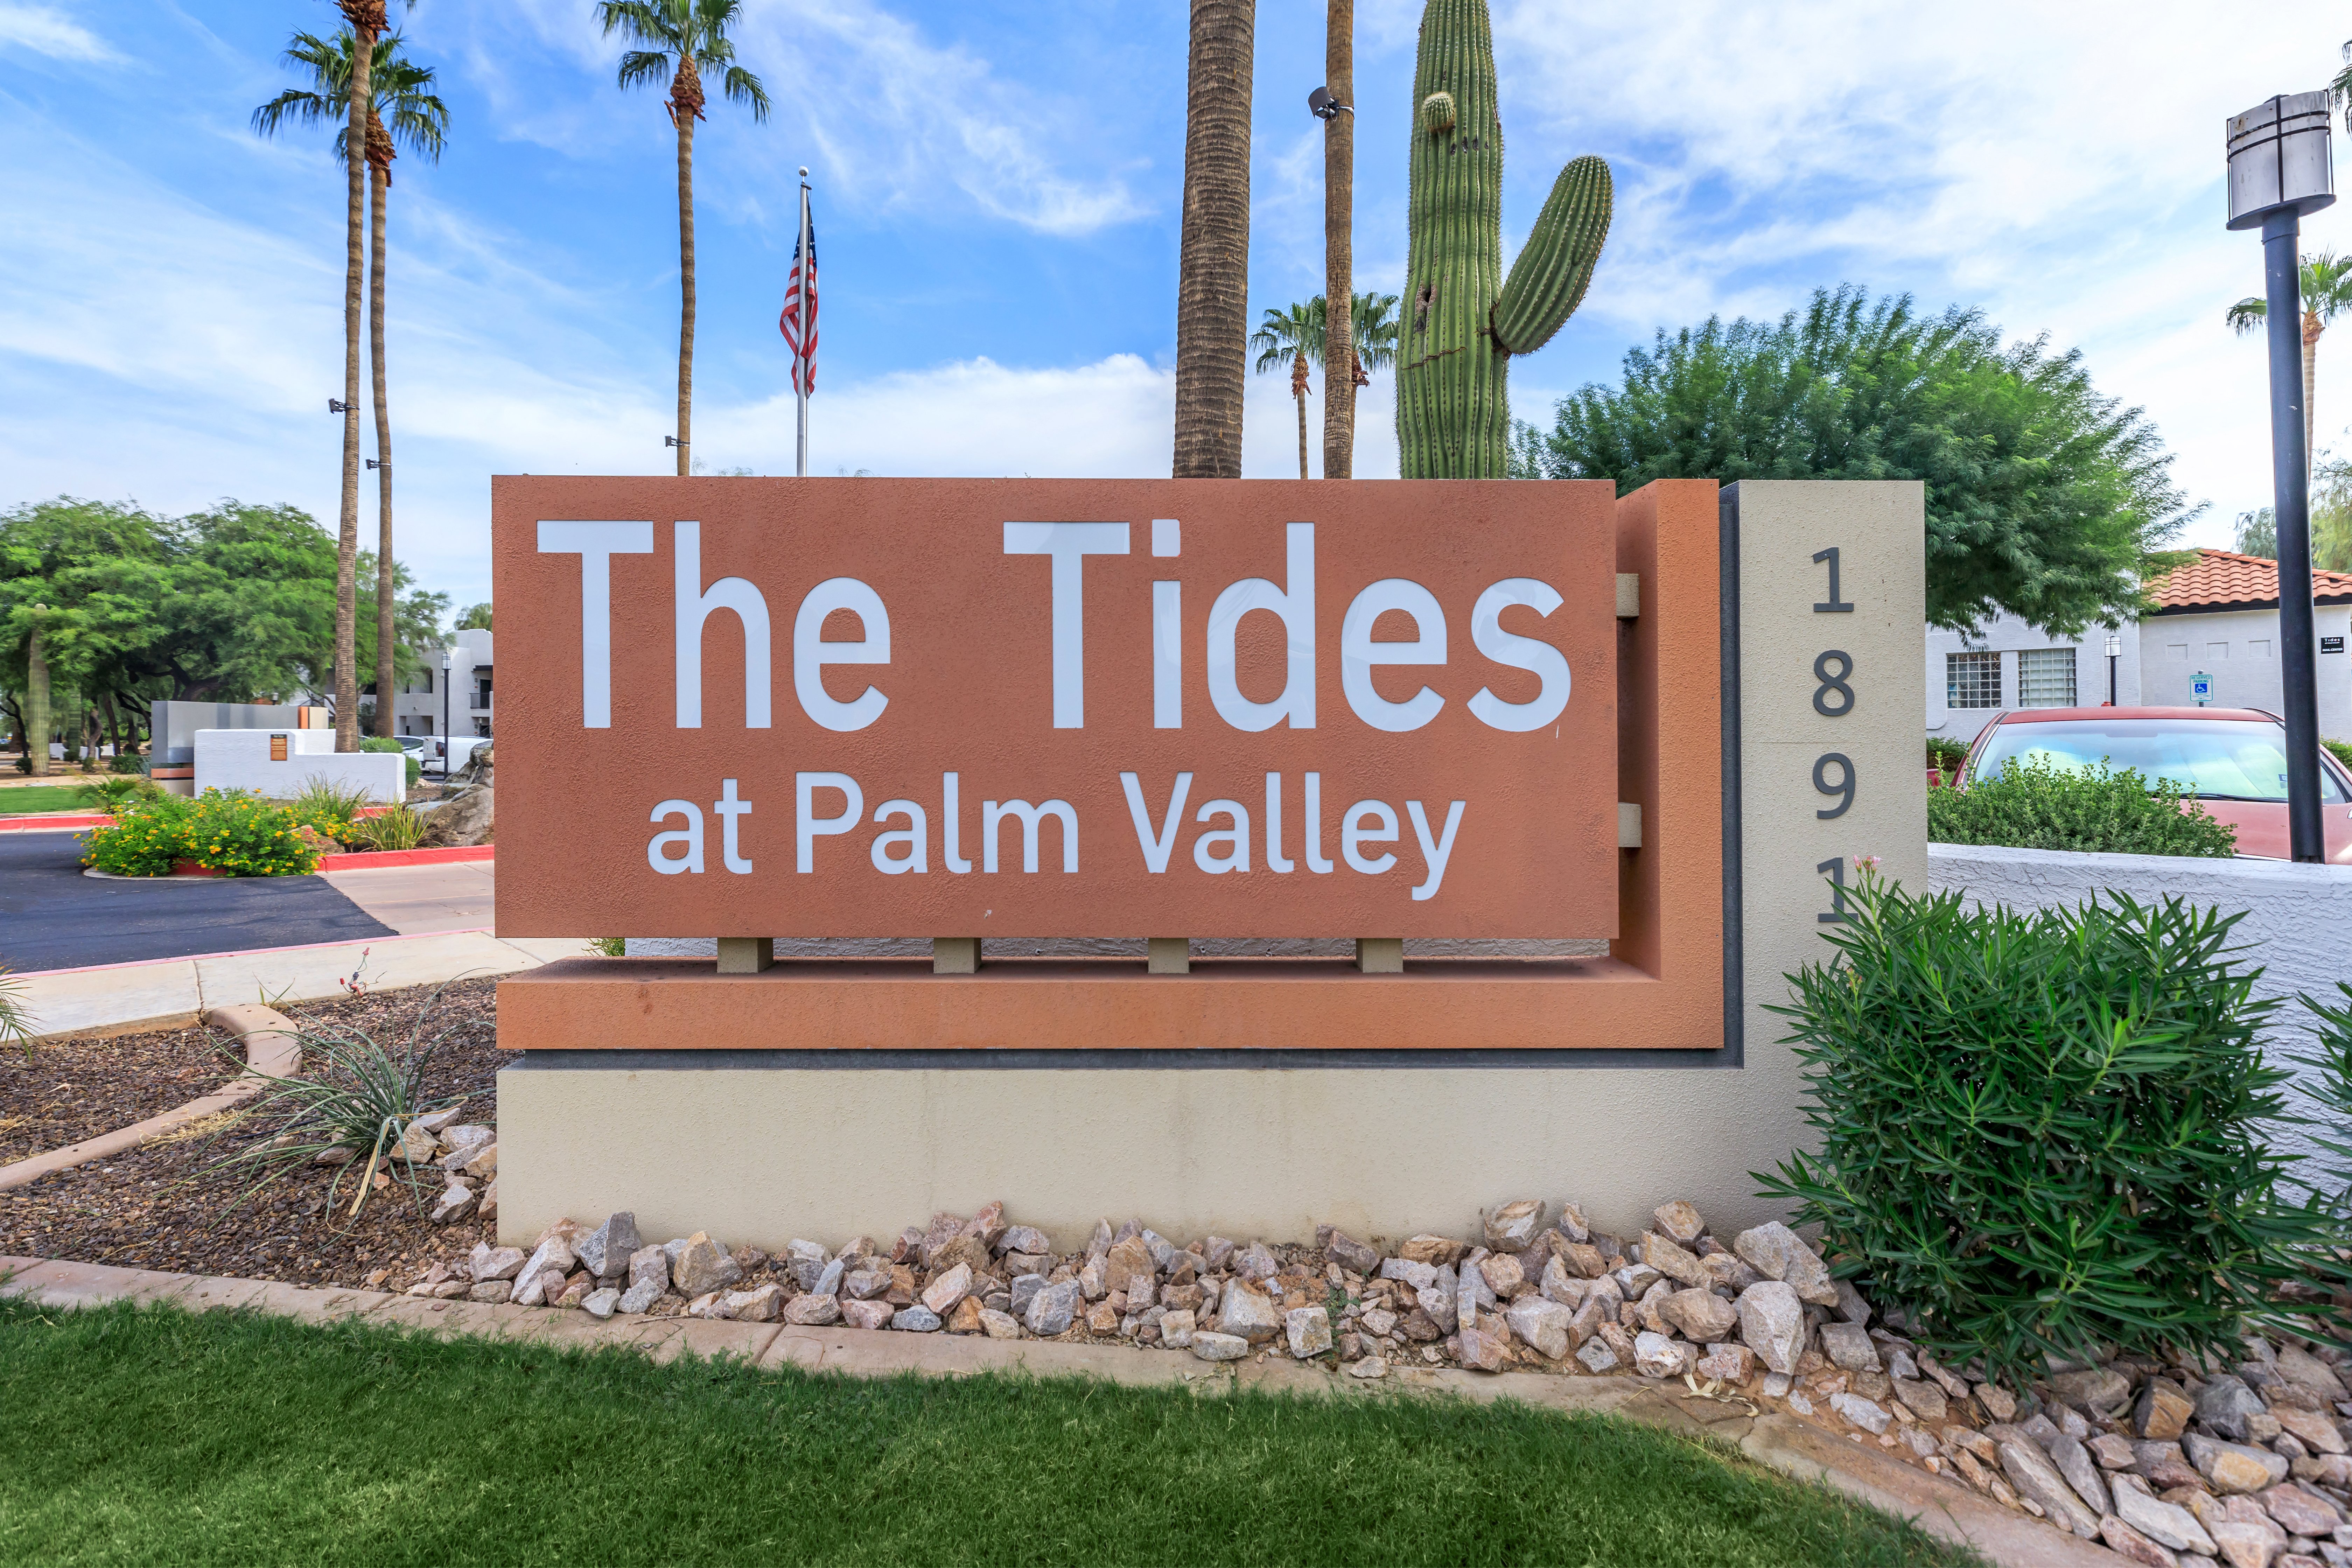 Tides at Palm Valley